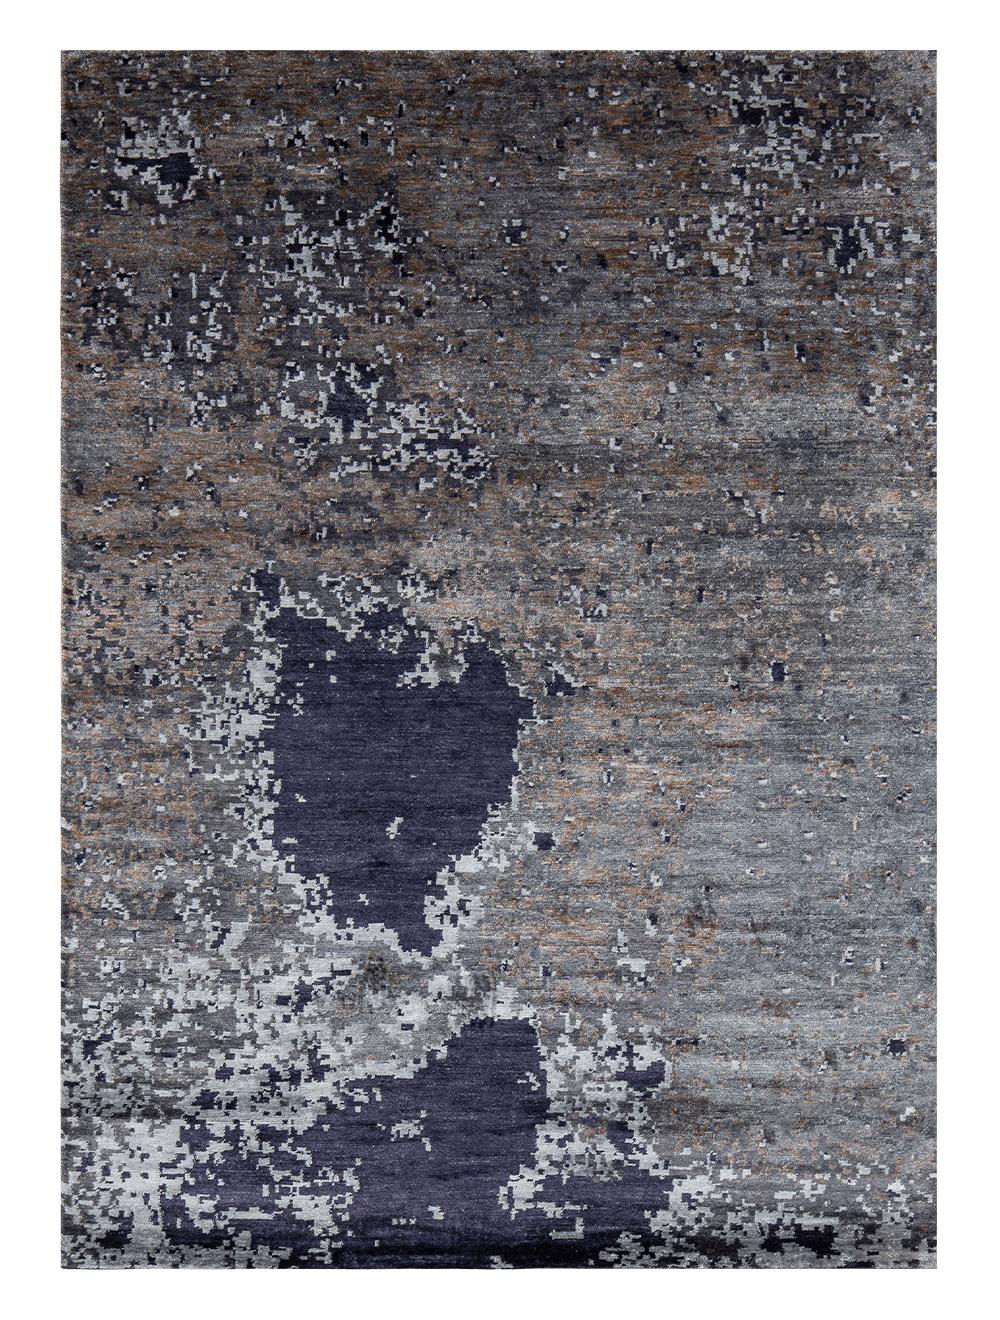 Moon night carpet by Massimo Copenhagen.
Handknotted
Materials: 100% bamboo 
Dimensions: W 200 x H 300 cm
Available colors: moon night and copper moon.
Other dimensions are available: 170 x 240 cm and special sizes.

Moon Night is a high